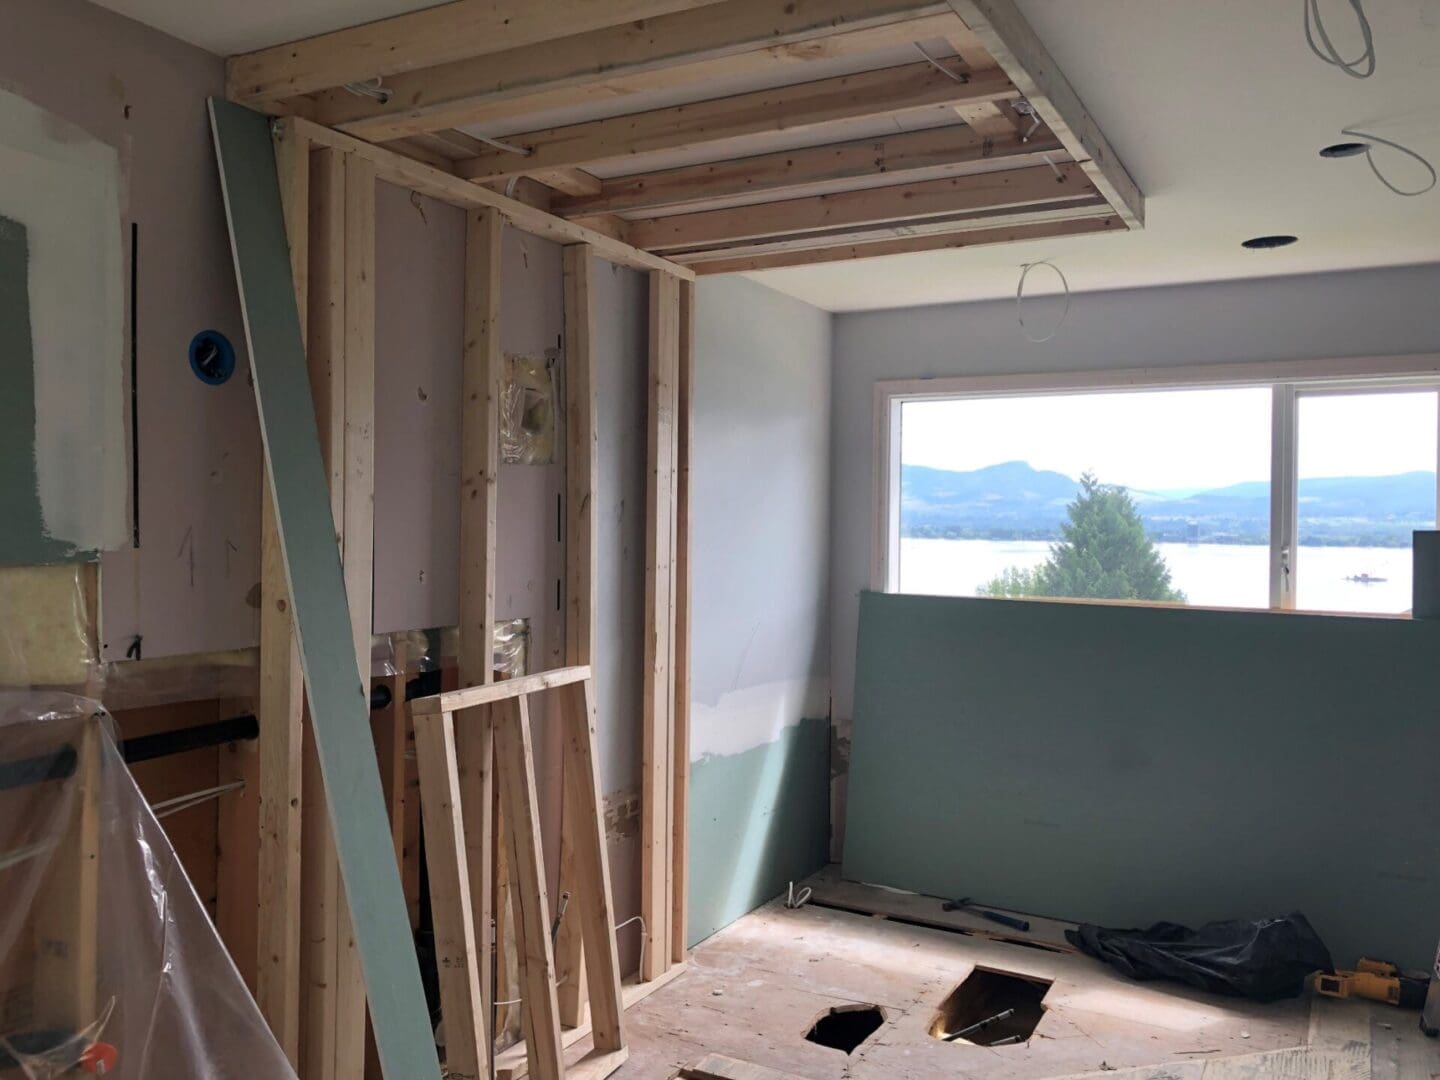 A room being built with wood and walls